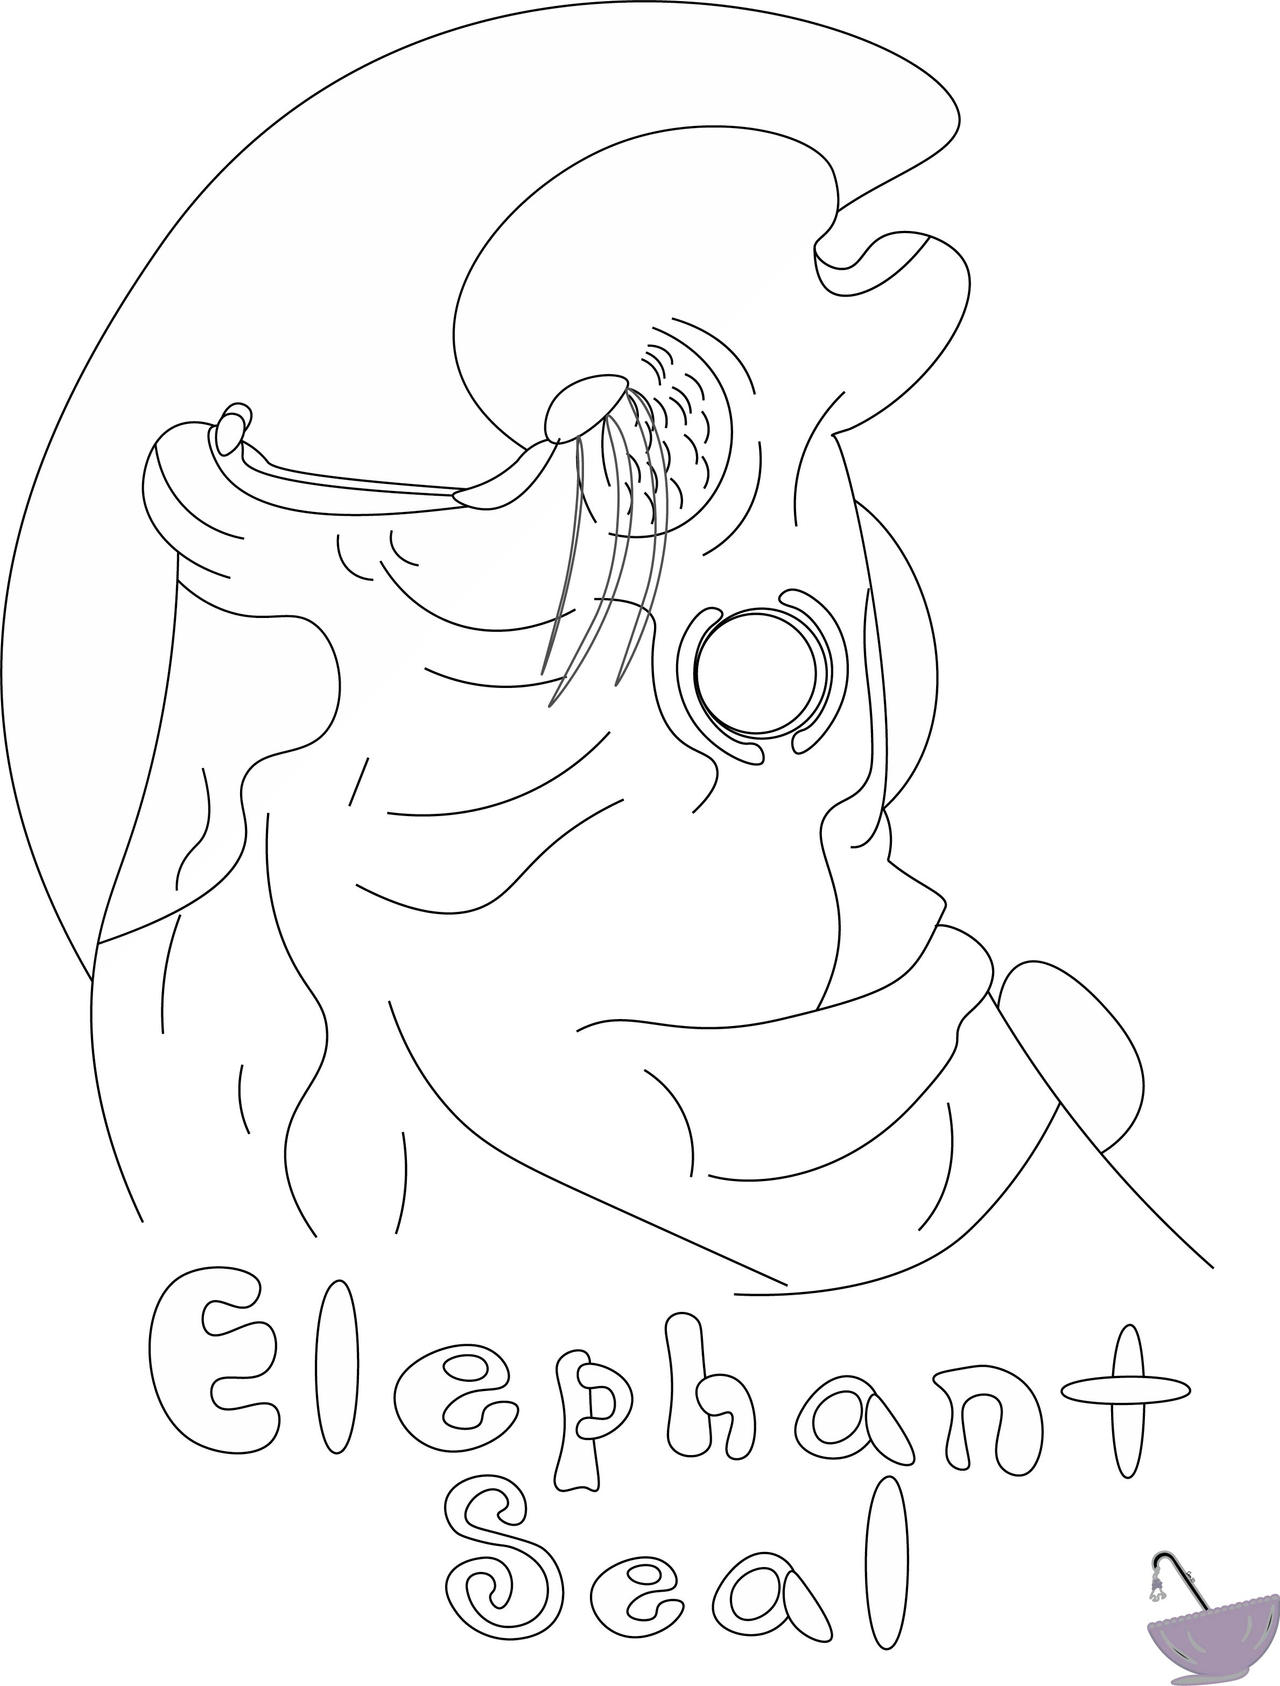 E elephant seal coloring page by merlinmetal on